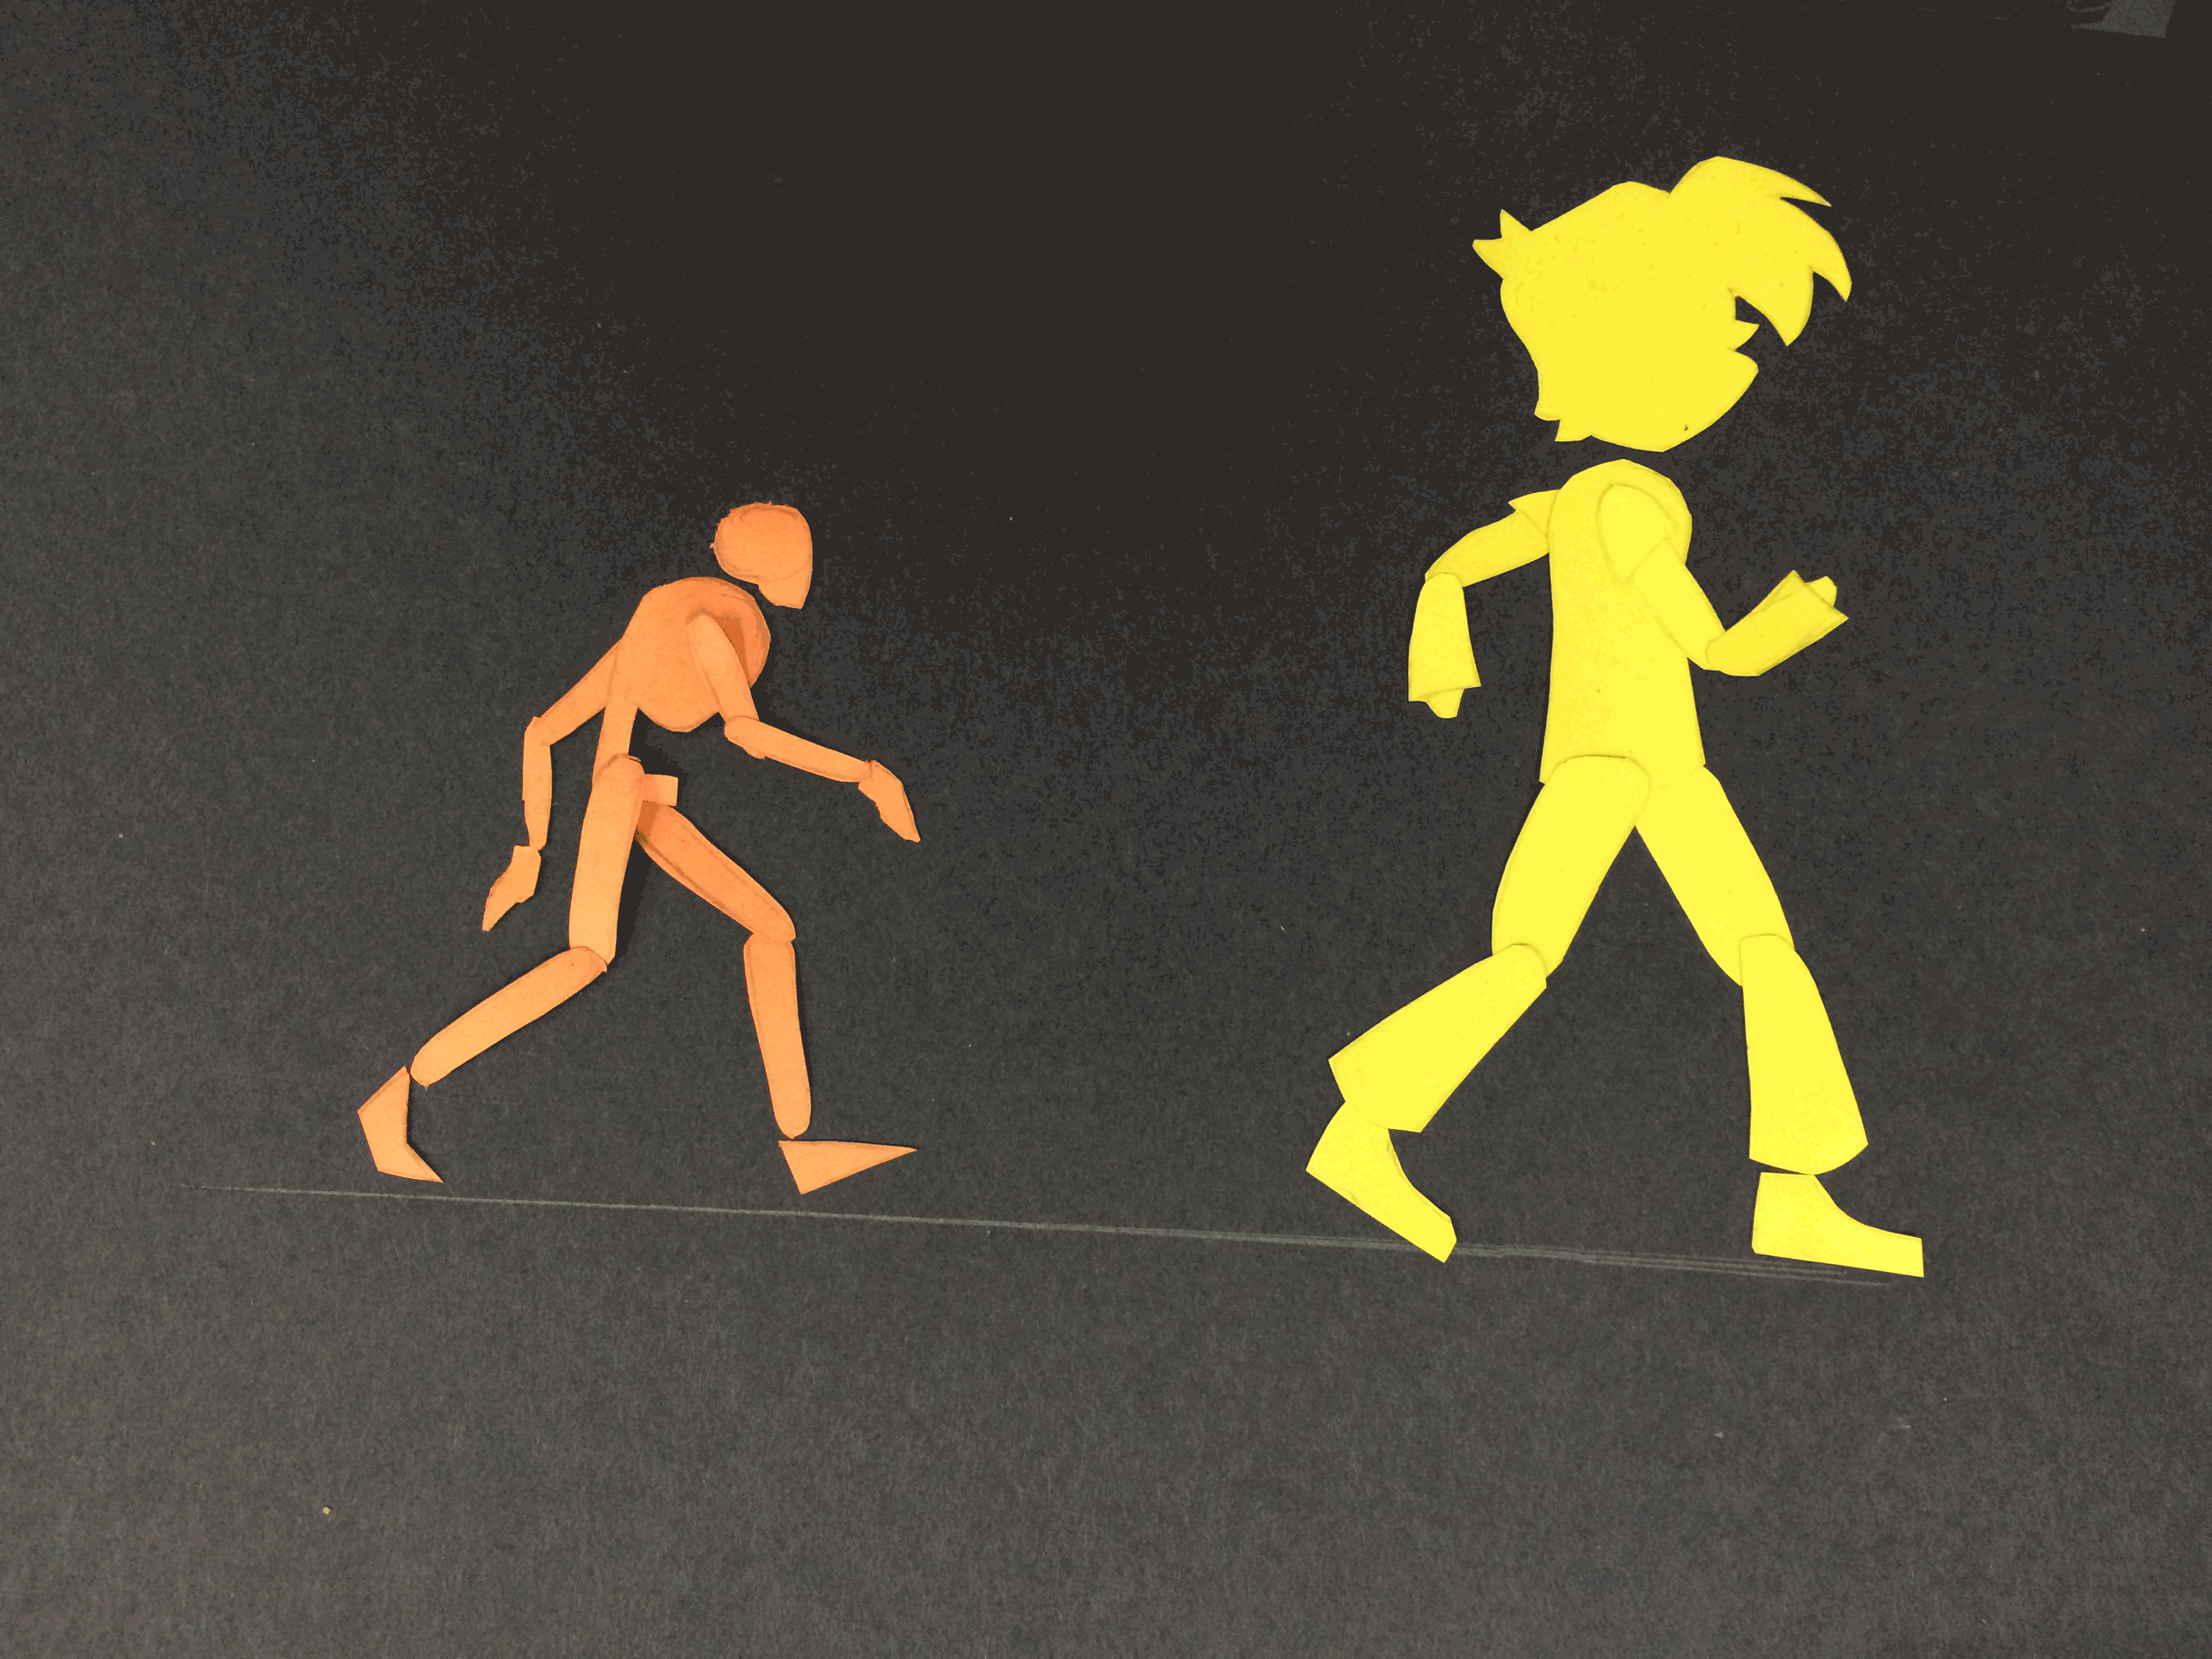 Cut Out Walk-Cycle GIF by Snoopdog1560 on DeviantArt